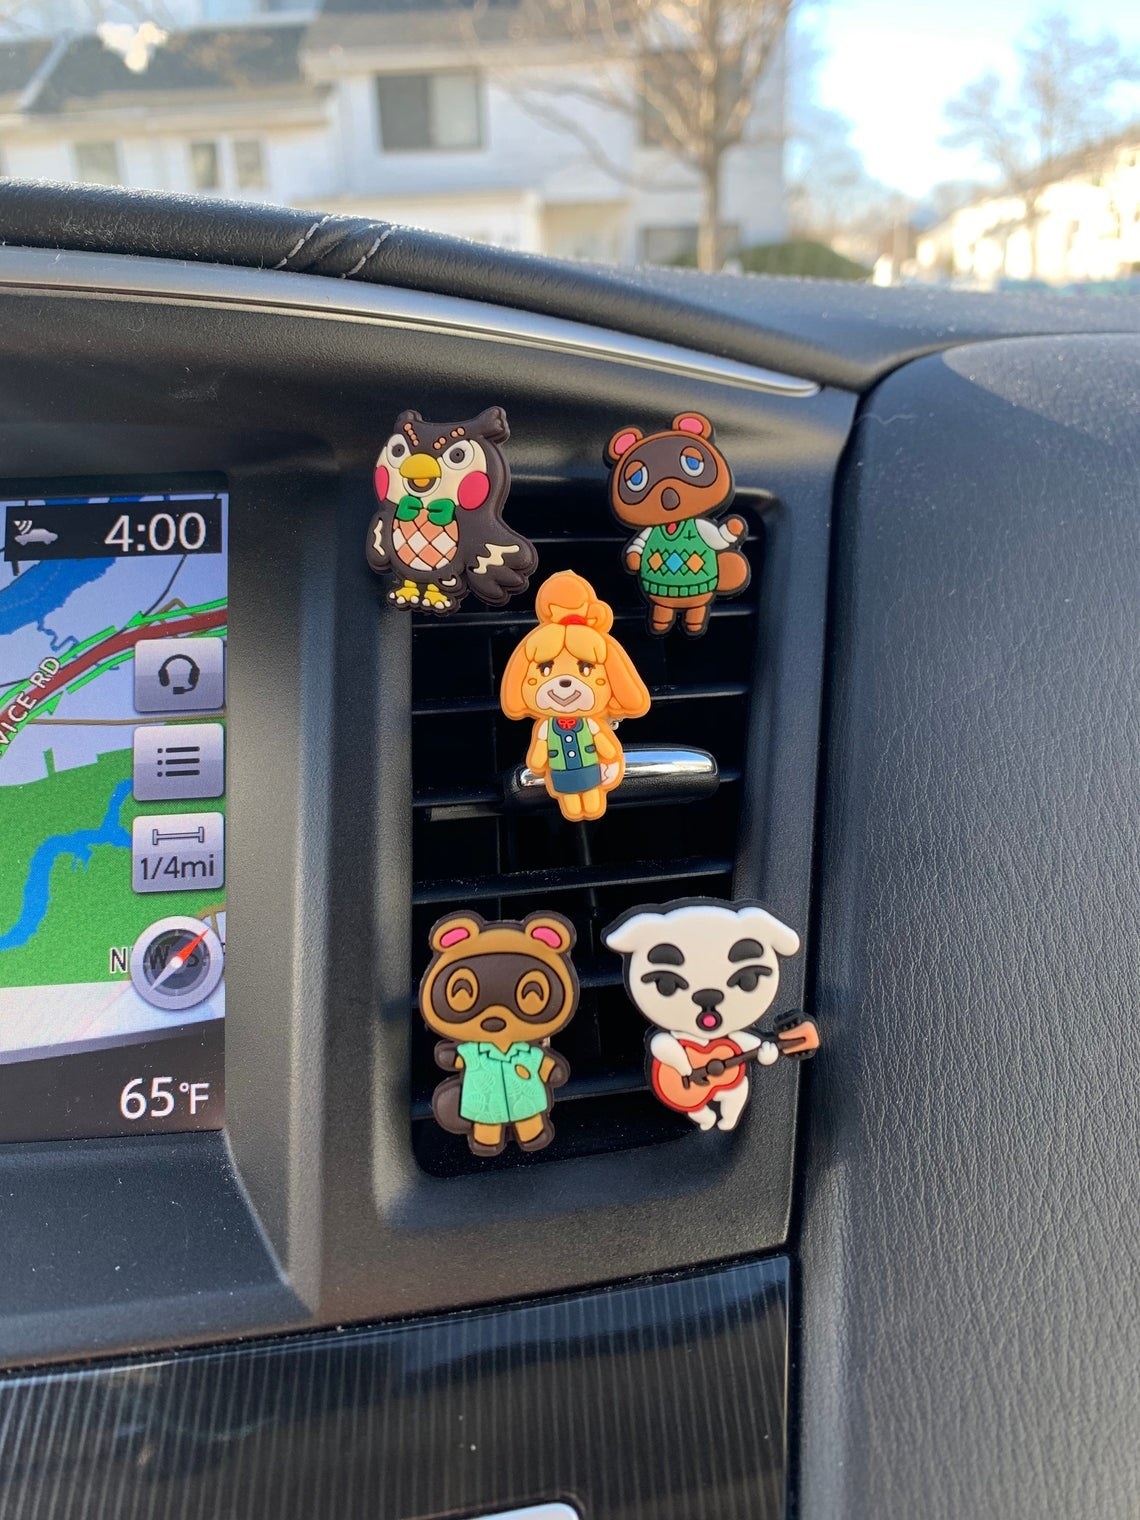 vent pins shaped like isabelle, kk slider, tom nook, timmy/tommy, and blathers